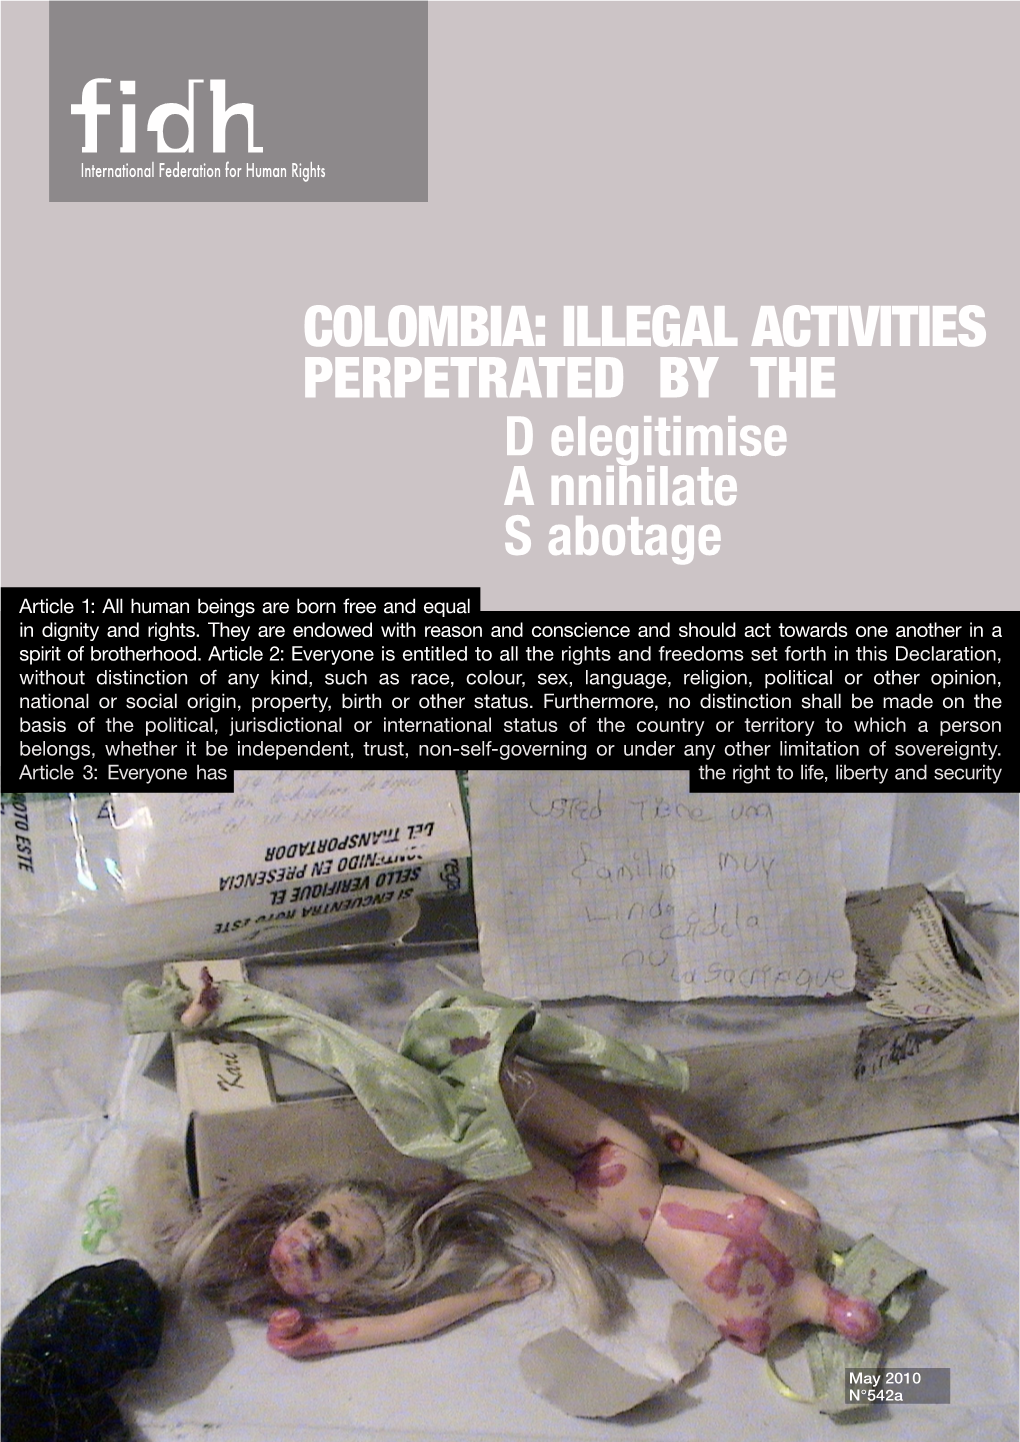 COLOMBIA: Illegal ACTIVITIES PERPETRATED by the D Elegitimise a Nnihilate S Abotage of Person